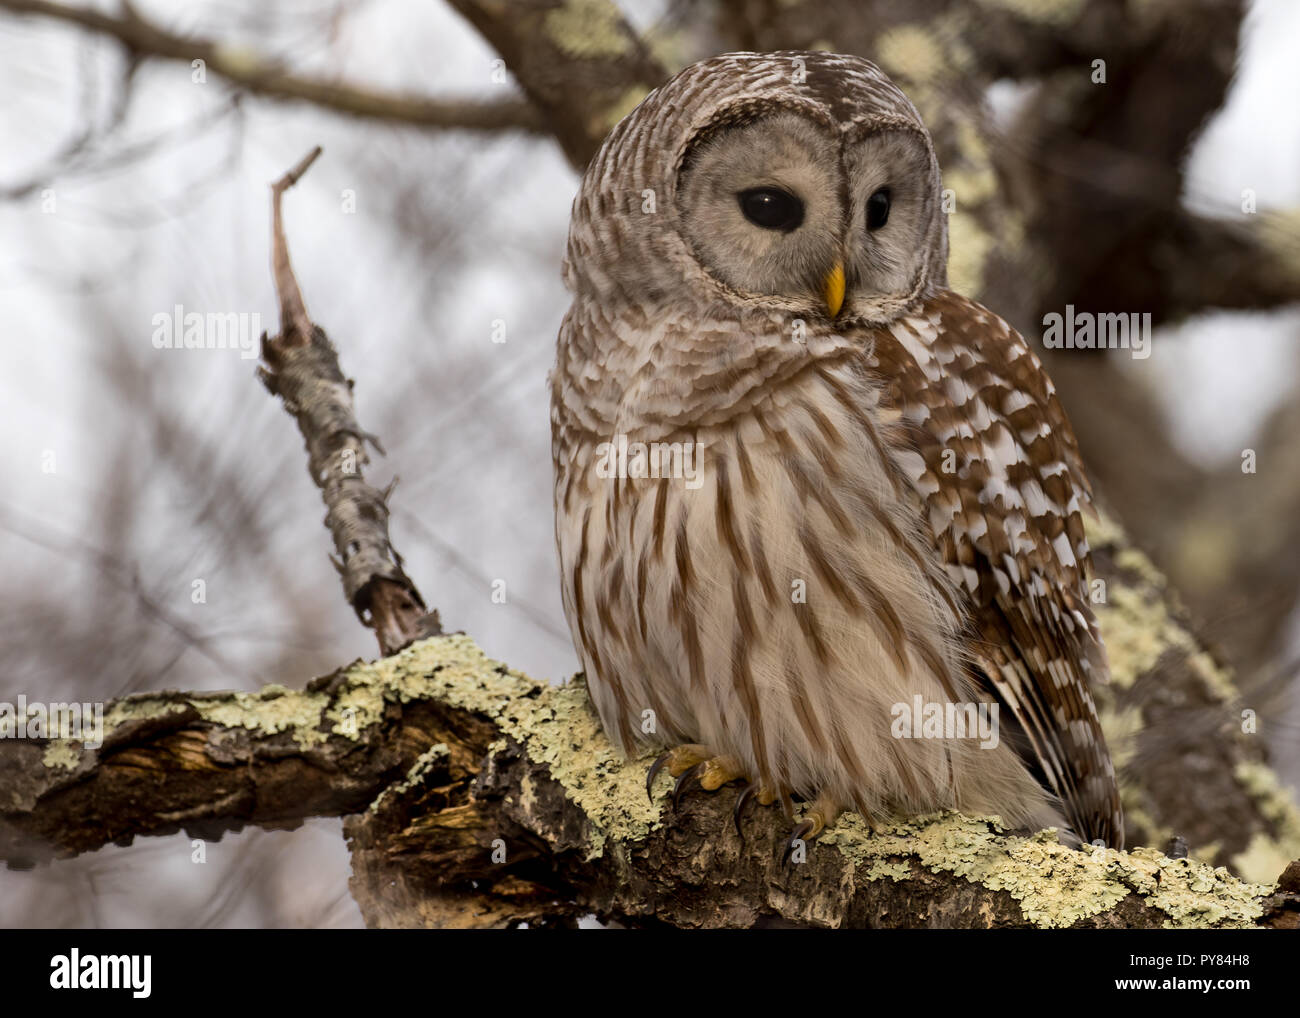 Barred owl on branch Stock Photo